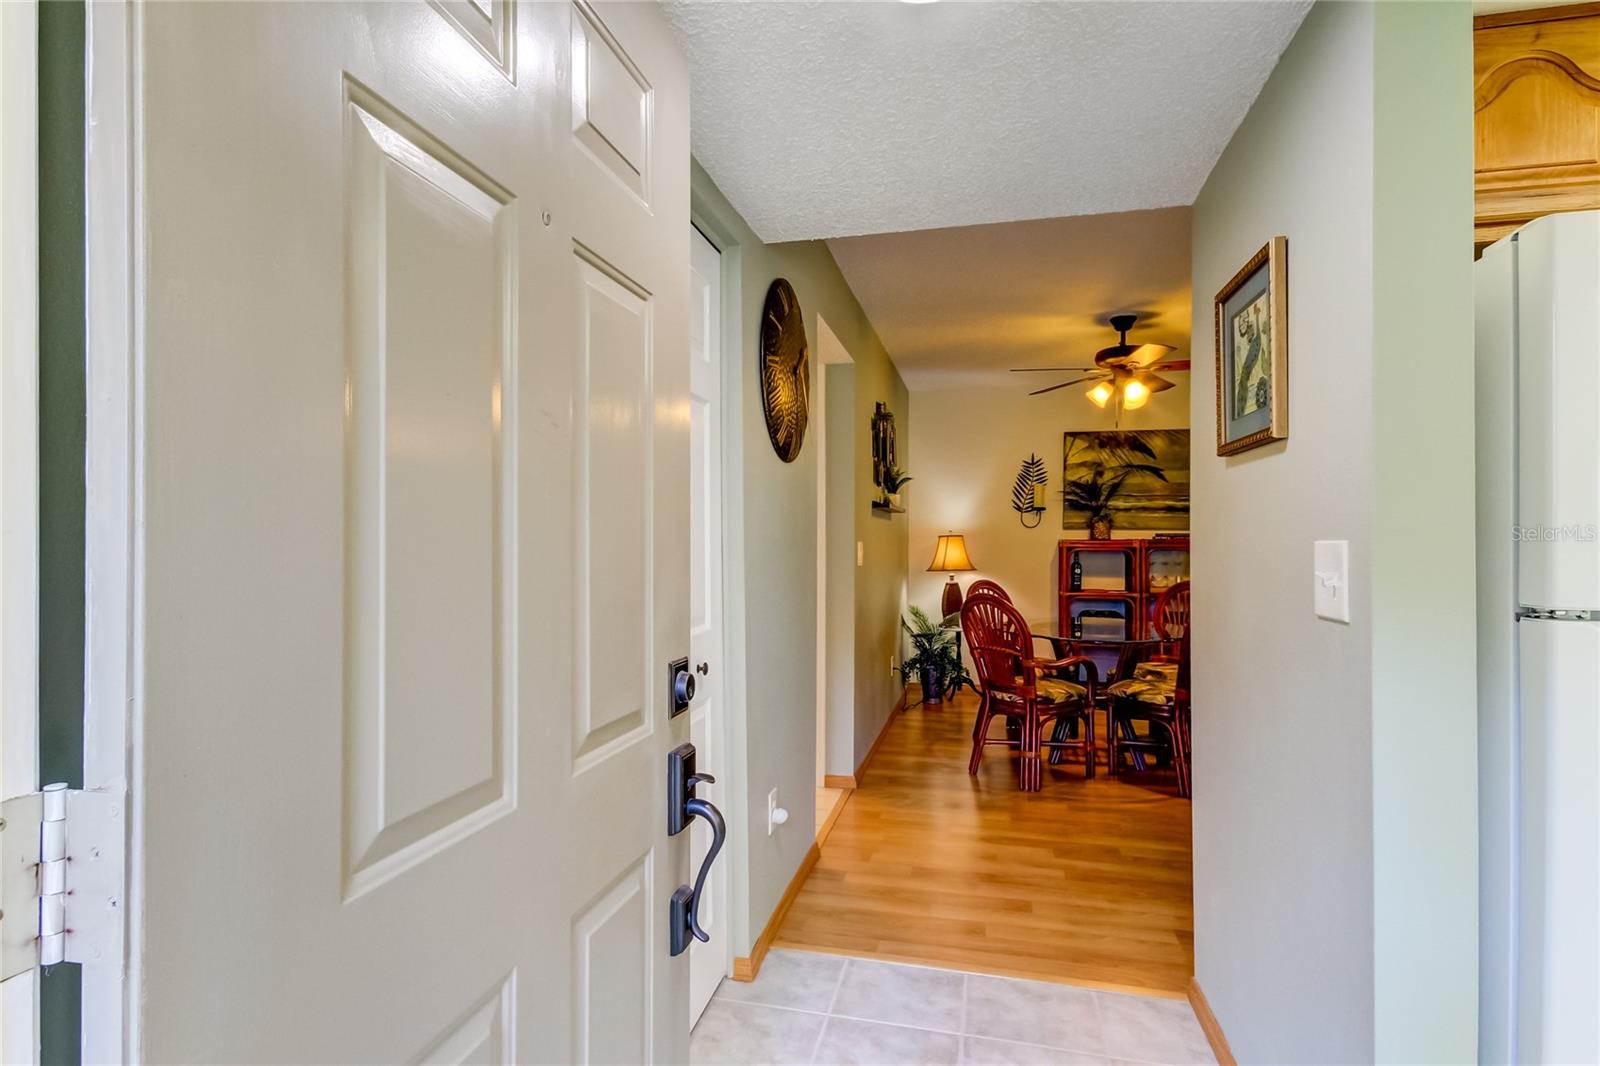 Enter a Foyer (6.7' x 4.3').. Pivot Right to Kitchen, or Head Straight into Great Room..